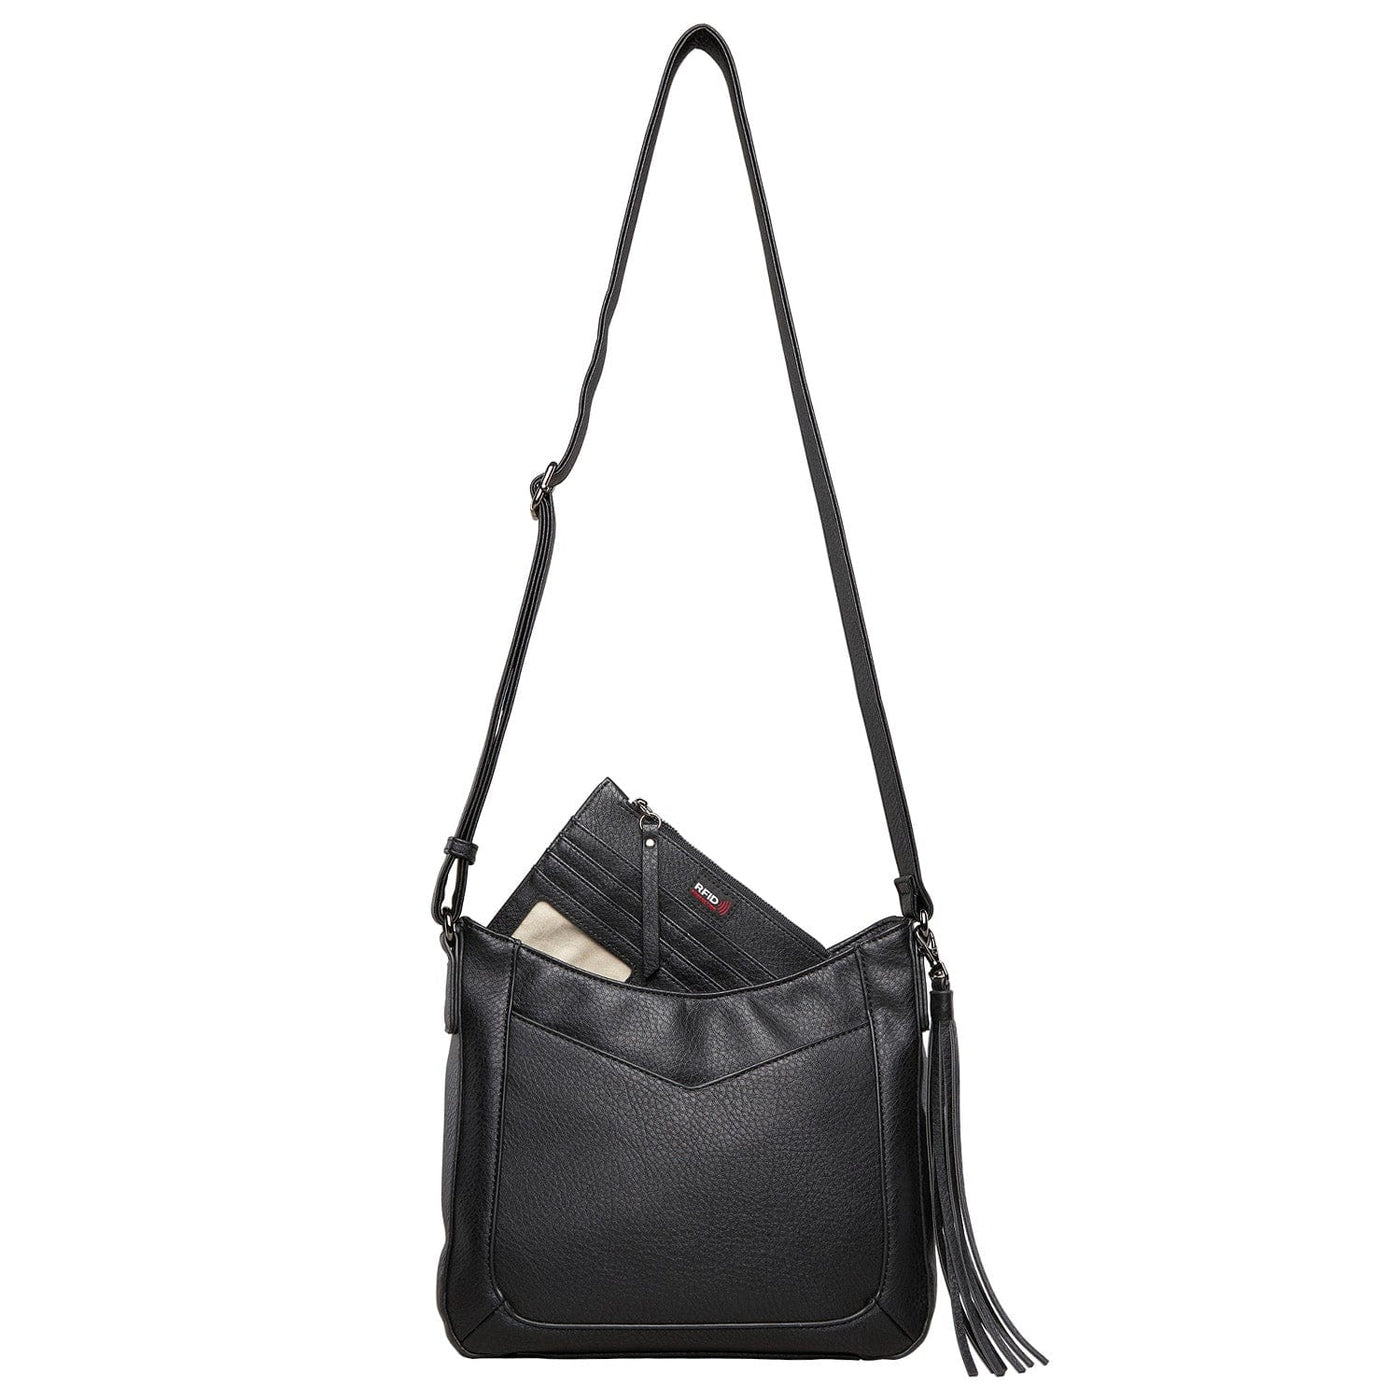 Concealed Carry Emery Crossbody Wallet-  YKK Locking Zippered Bag -  Easy Conceal Carry -  CCW Purse for Women -  concealed carry Handbag for woman -  Conceal and Carry purse for Handgun -   Designer Luxury Conceal Carry Handbag -  Unique Hide Handbag Gun and Pistol Bag -  carry Handbag for concealed gun carry -  Unique Emery gun Handbag -  Crossbody with RFID Slim Wallet 